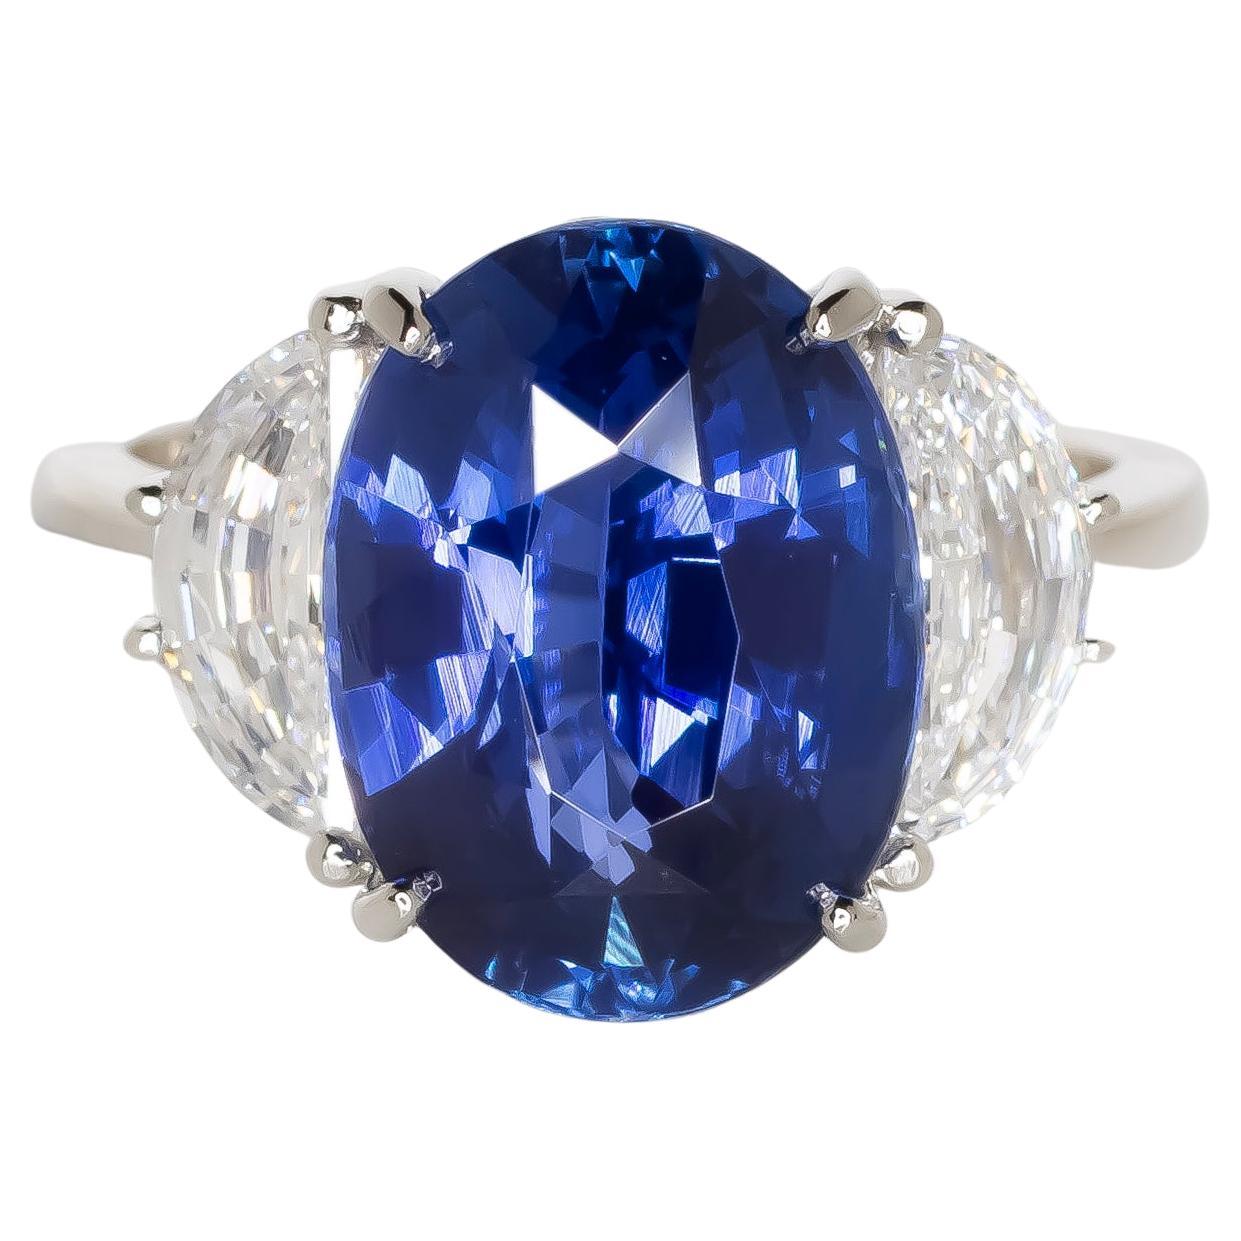 GIA GRS Certified 10.61 Carat Oval Blue Sapphire Oval Diamond Ring